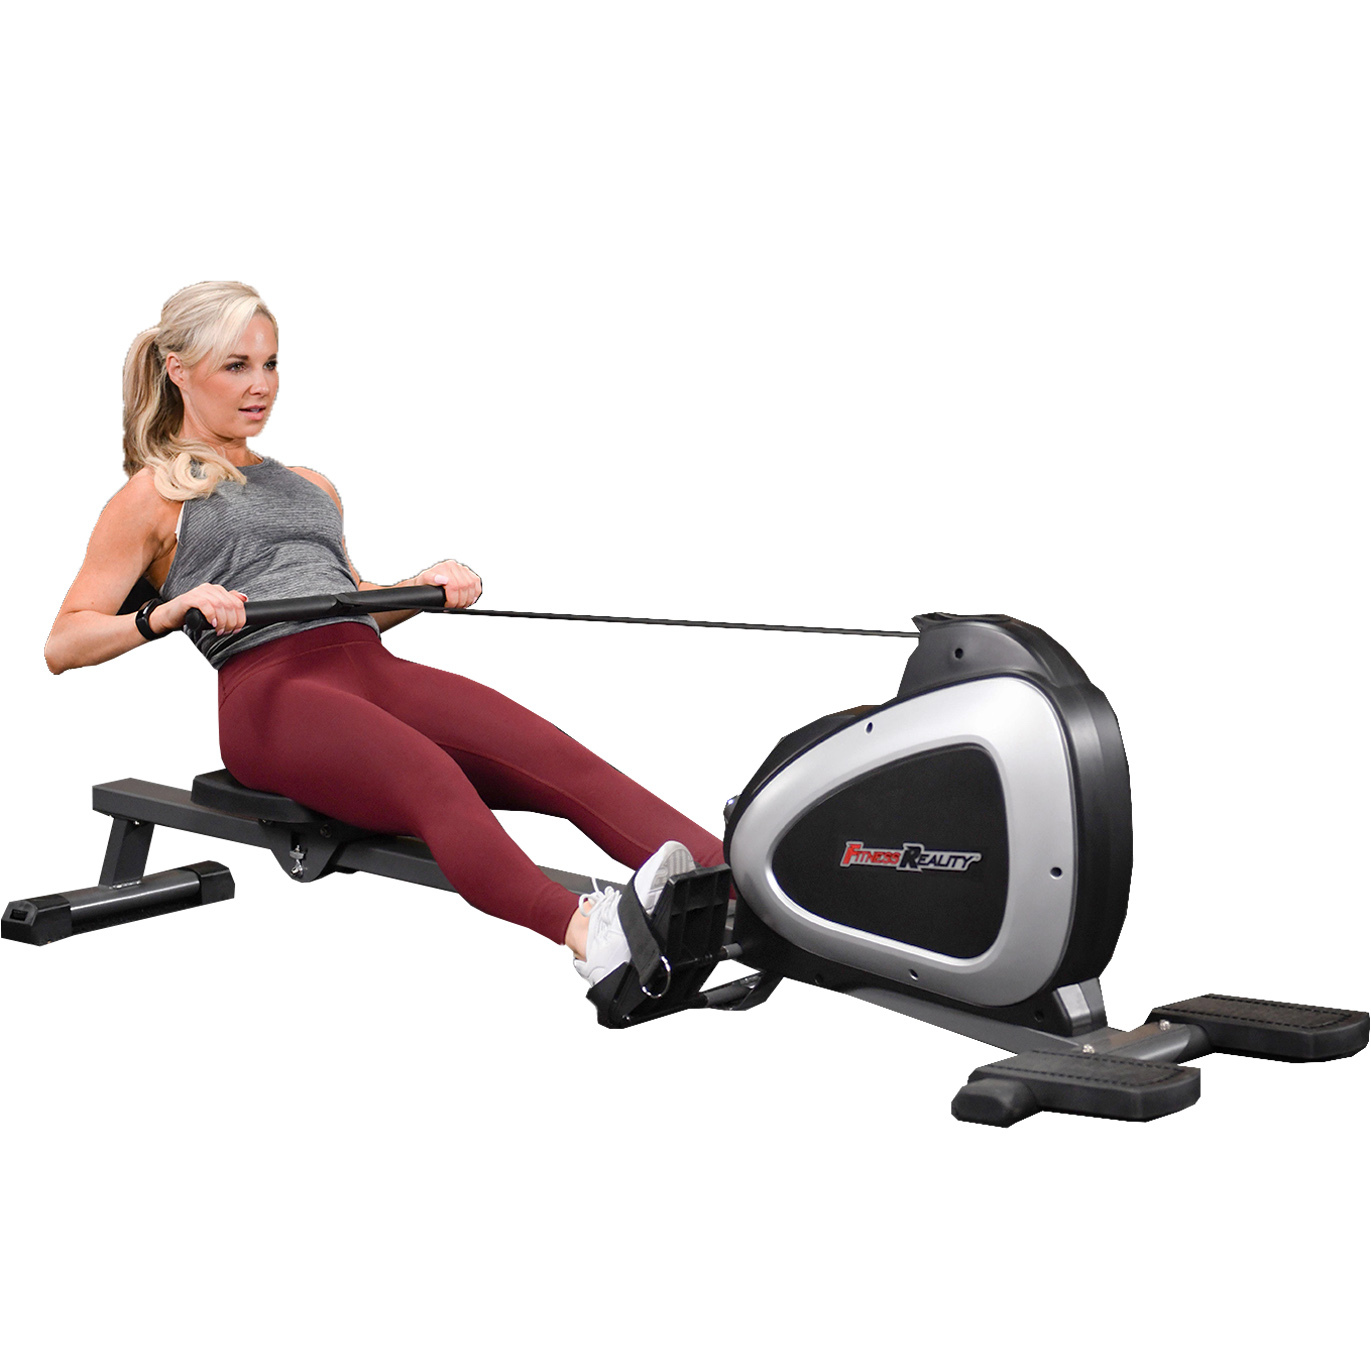 Fitness Reality 1000 PLUS Bluetooth Magnetic Rowing Machine Rower with Extended Optional Full Body Exercises and 14 Resistance Levels - image 1 of 12